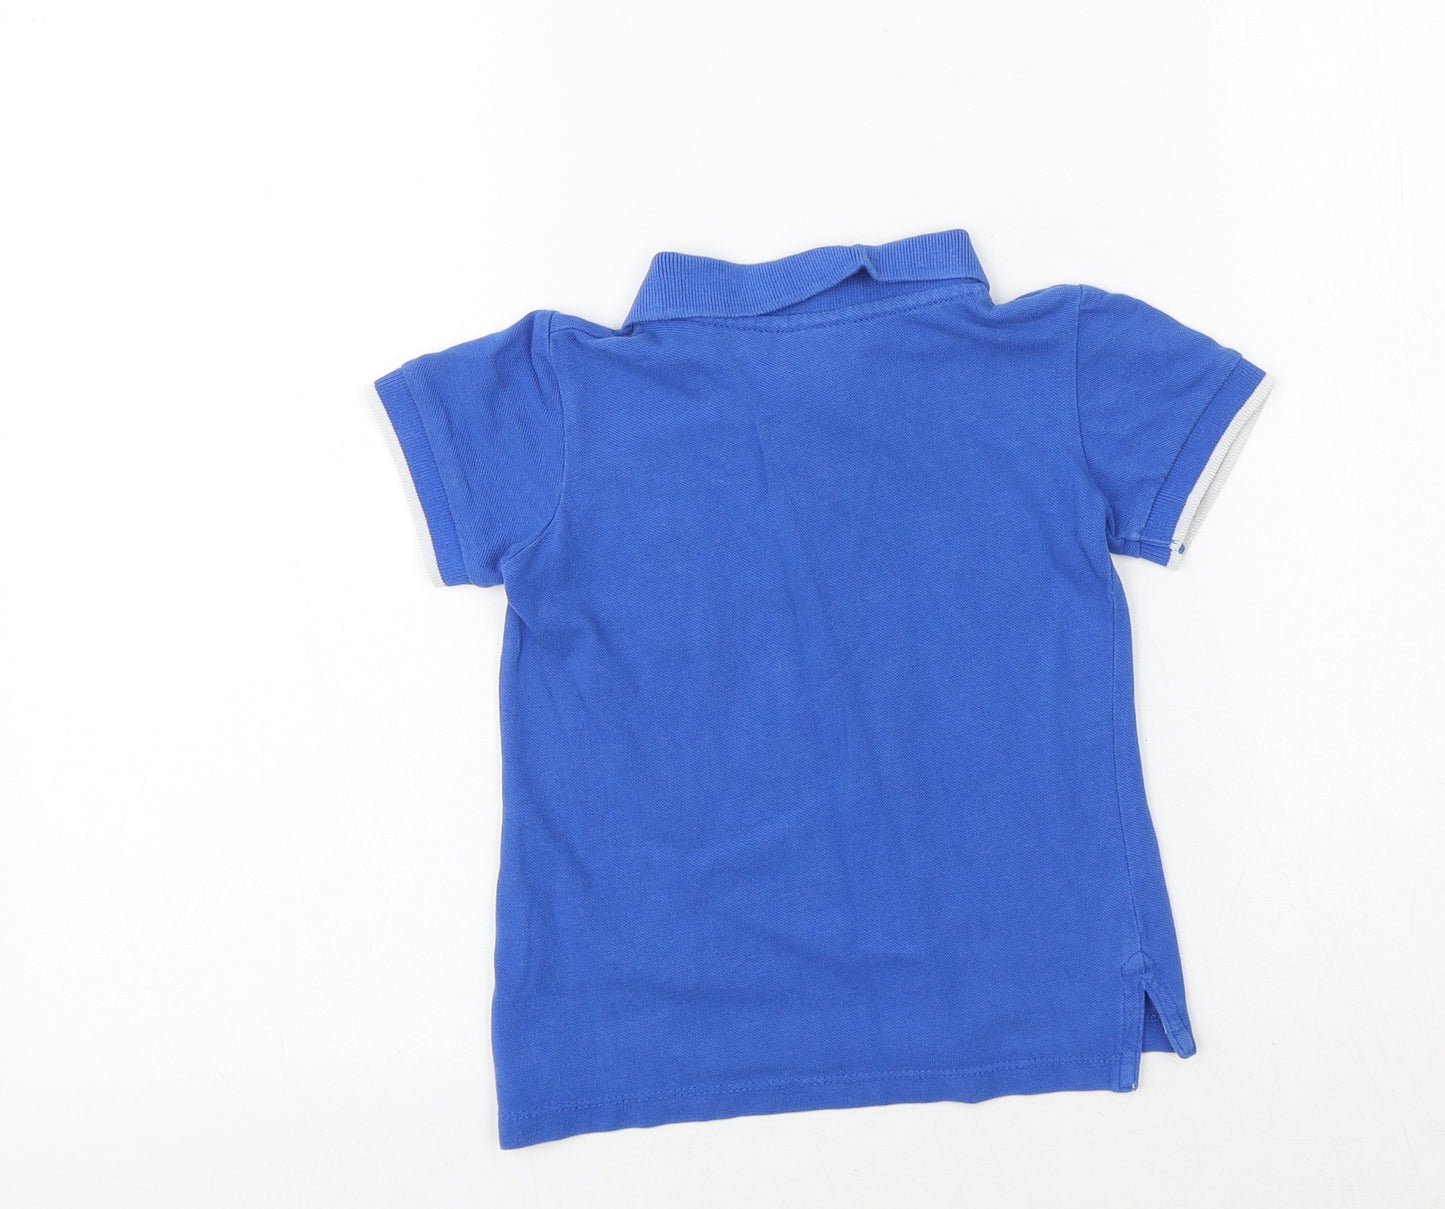 Beverly Hills Polo Club Boys Blue 100% Cotton Basic Polo Size 5-6 Years Collared Button